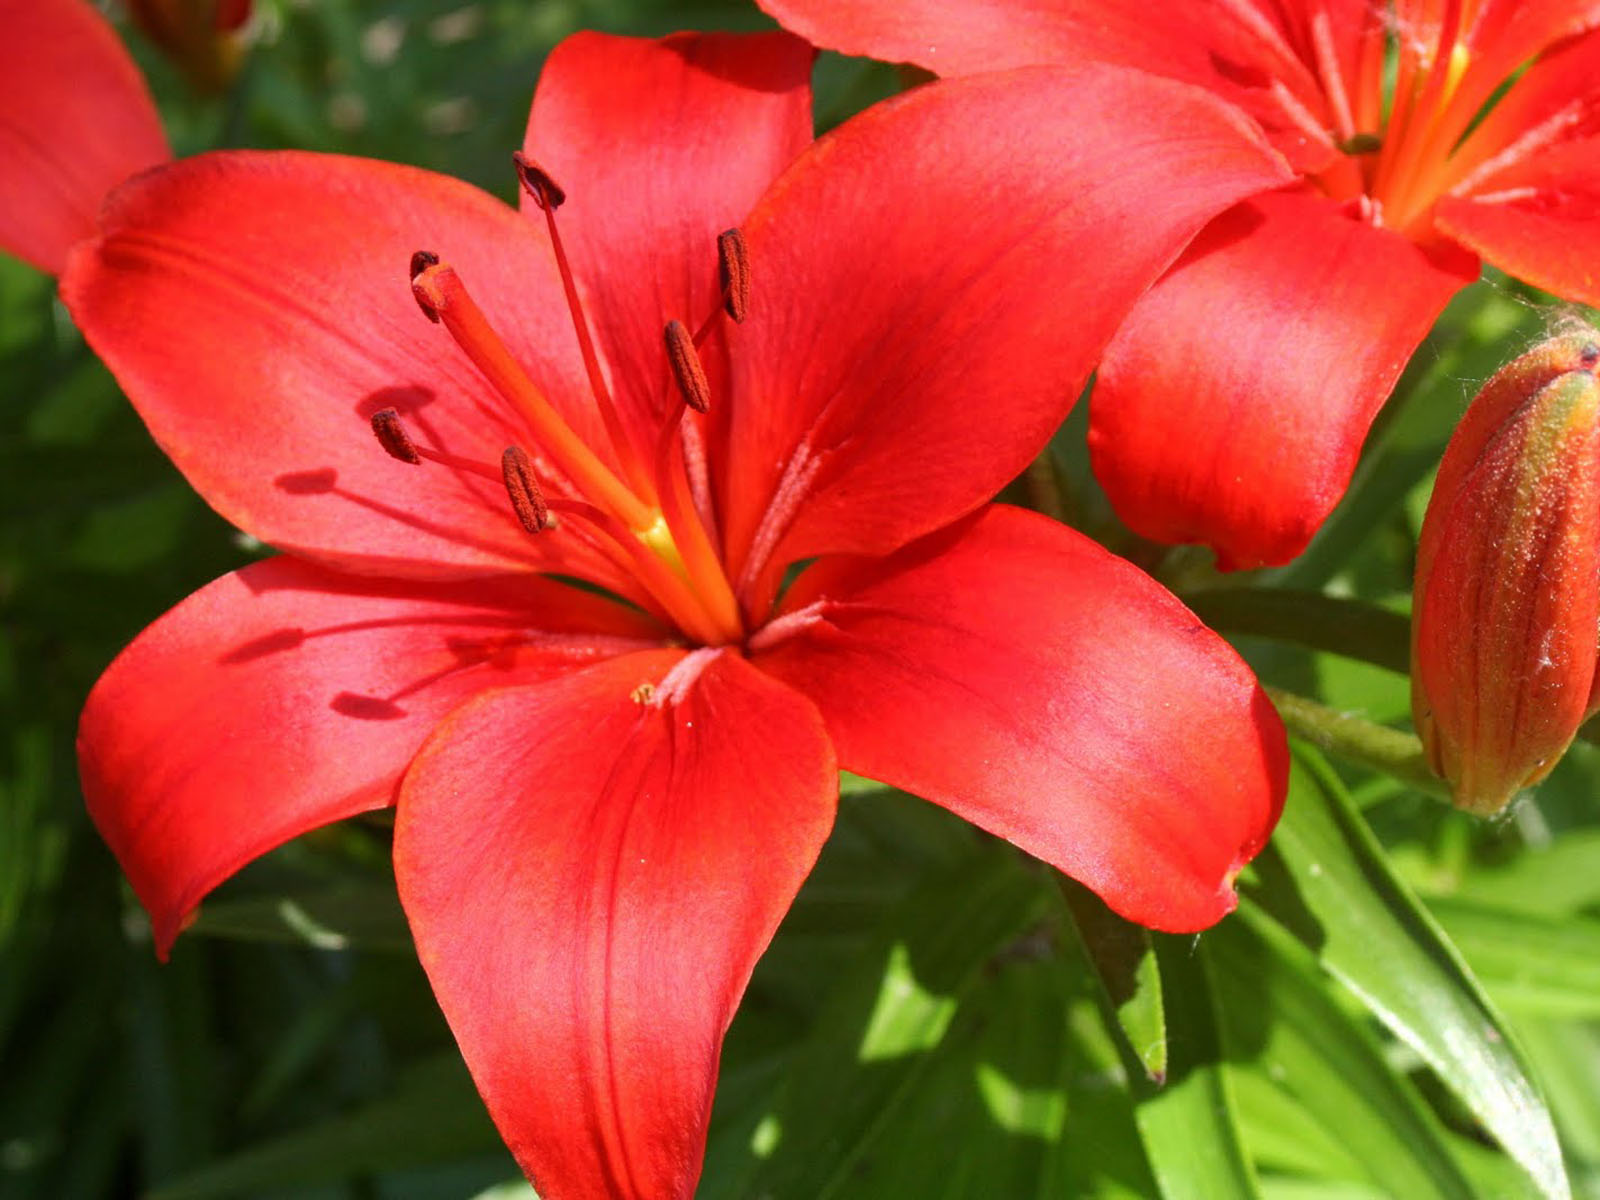  Asiatic Lily Flowers Wallpapers Images Photos and Pictures for 1600x1200